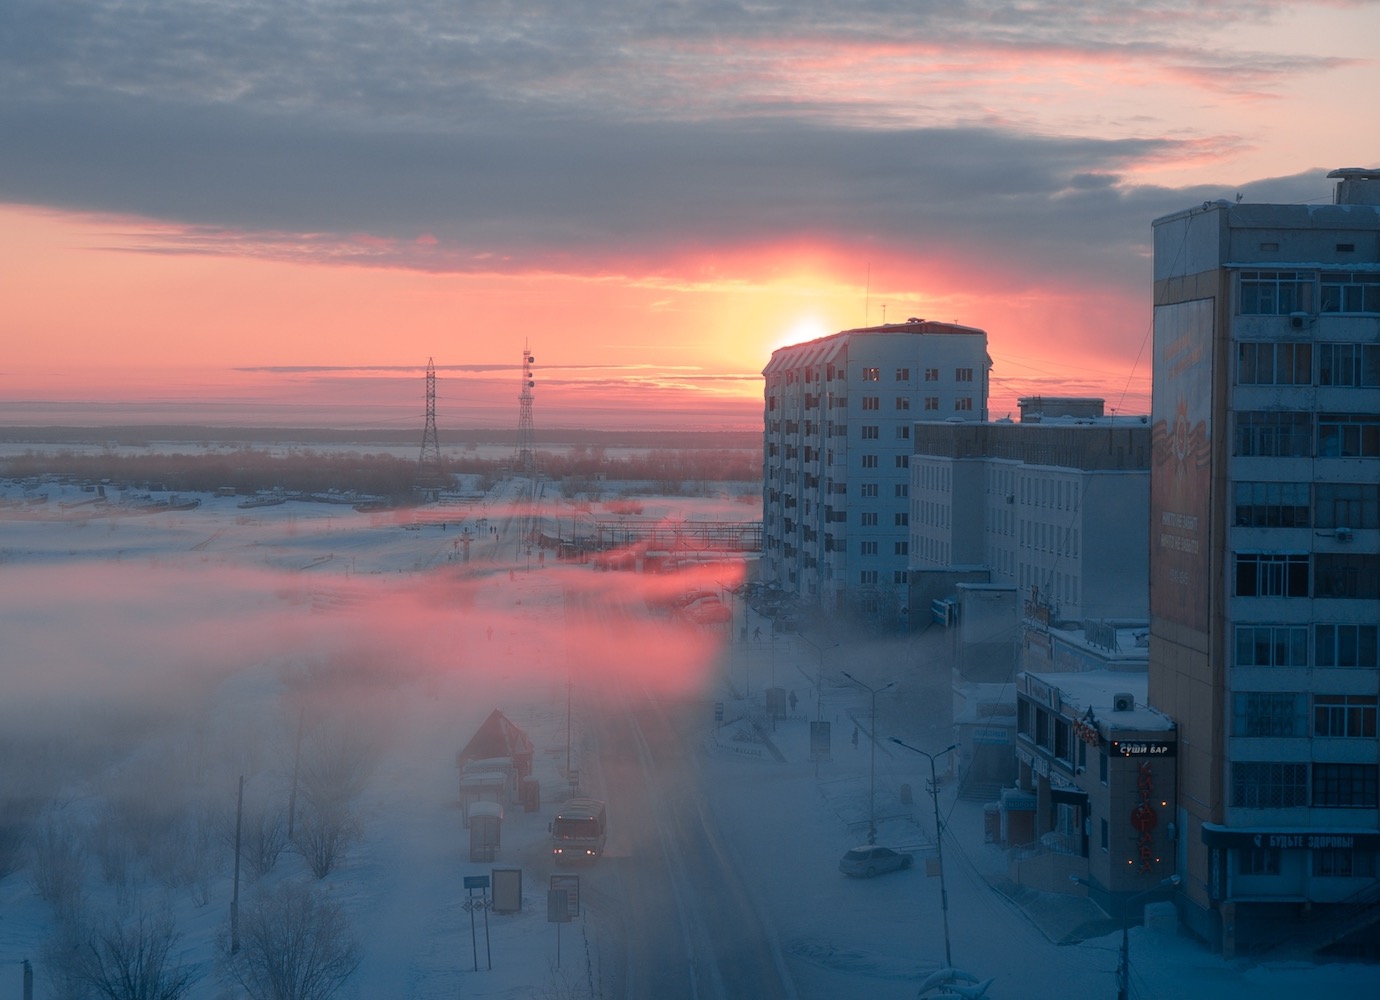 Sunset-tinted photos of Russia that find romantic beauty in the ordinary 